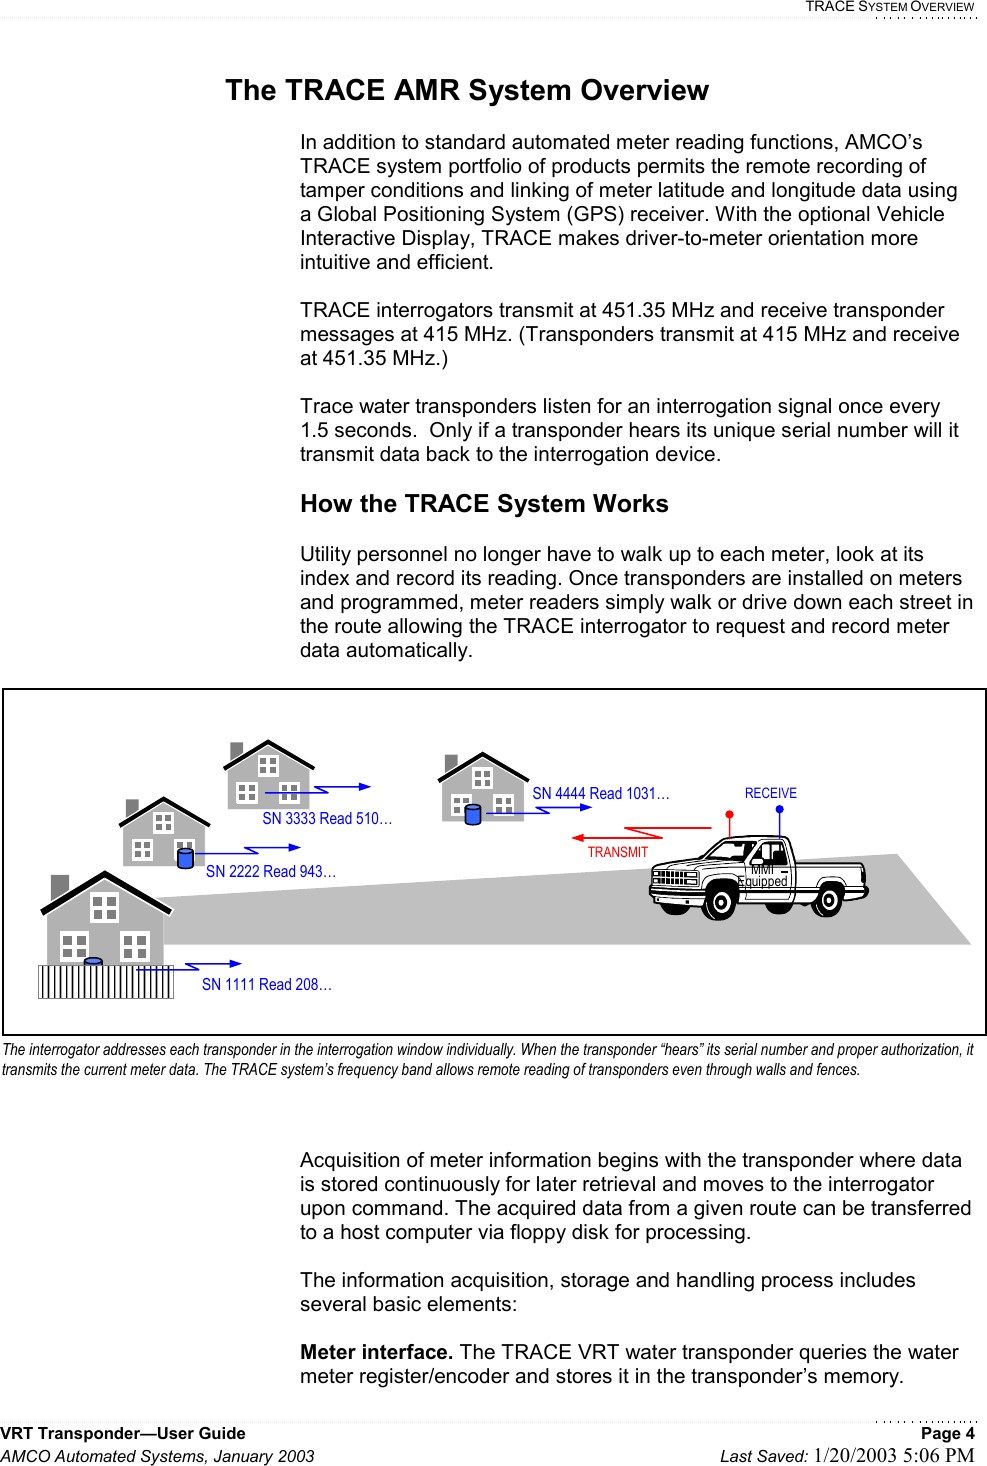   TRACE SYSTEM OVERVIEW VRT Transponder—User Guide    Page 4 AMCO Automated Systems, January 2003    Last Saved: 1/20/2003 5:06 PM  The TRACE AMR System Overview  In addition to standard automated meter reading functions, AMCO’s TRACE system portfolio of products permits the remote recording of tamper conditions and linking of meter latitude and longitude data using a Global Positioning System (GPS) receiver. With the optional Vehicle Interactive Display, TRACE makes driver-to-meter orientation more intuitive and efficient.   TRACE interrogators transmit at 451.35 MHz and receive transponder messages at 415 MHz. (Transponders transmit at 415 MHz and receive at 451.35 MHz.)    Trace water transponders listen for an interrogation signal once every 1.5 seconds.  Only if a transponder hears its unique serial number will it transmit data back to the interrogation device.  How the TRACE System Works  Utility personnel no longer have to walk up to each meter, look at its index and record its reading. Once transponders are installed on meters and programmed, meter readers simply walk or drive down each street in the route allowing the TRACE interrogator to request and record meter data automatically.  Acquisition of meter information begins with the transponder where data is stored continuously for later retrieval and moves to the interrogator upon command. The acquired data from a given route can be transferred to a host computer via floppy disk for processing.  The information acquisition, storage and handling process includes several basic elements:  Meter interface. The TRACE VRT water transponder queries the water meter register/encoder and stores it in the transponder’s memory.  SN 1111 Read 208… SN 2222 Read 943… MMI Equipped SN 3333 Read 510…SN 4444 Read 1031…TRANSMITRECEIVEThe interrogator addresses each transponder in the interrogation window individually. When the transponder “hears” its serial number and proper authorization, it transmits the current meter data. The TRACE system’s frequency band allows remote reading of transponders even through walls and fences.  